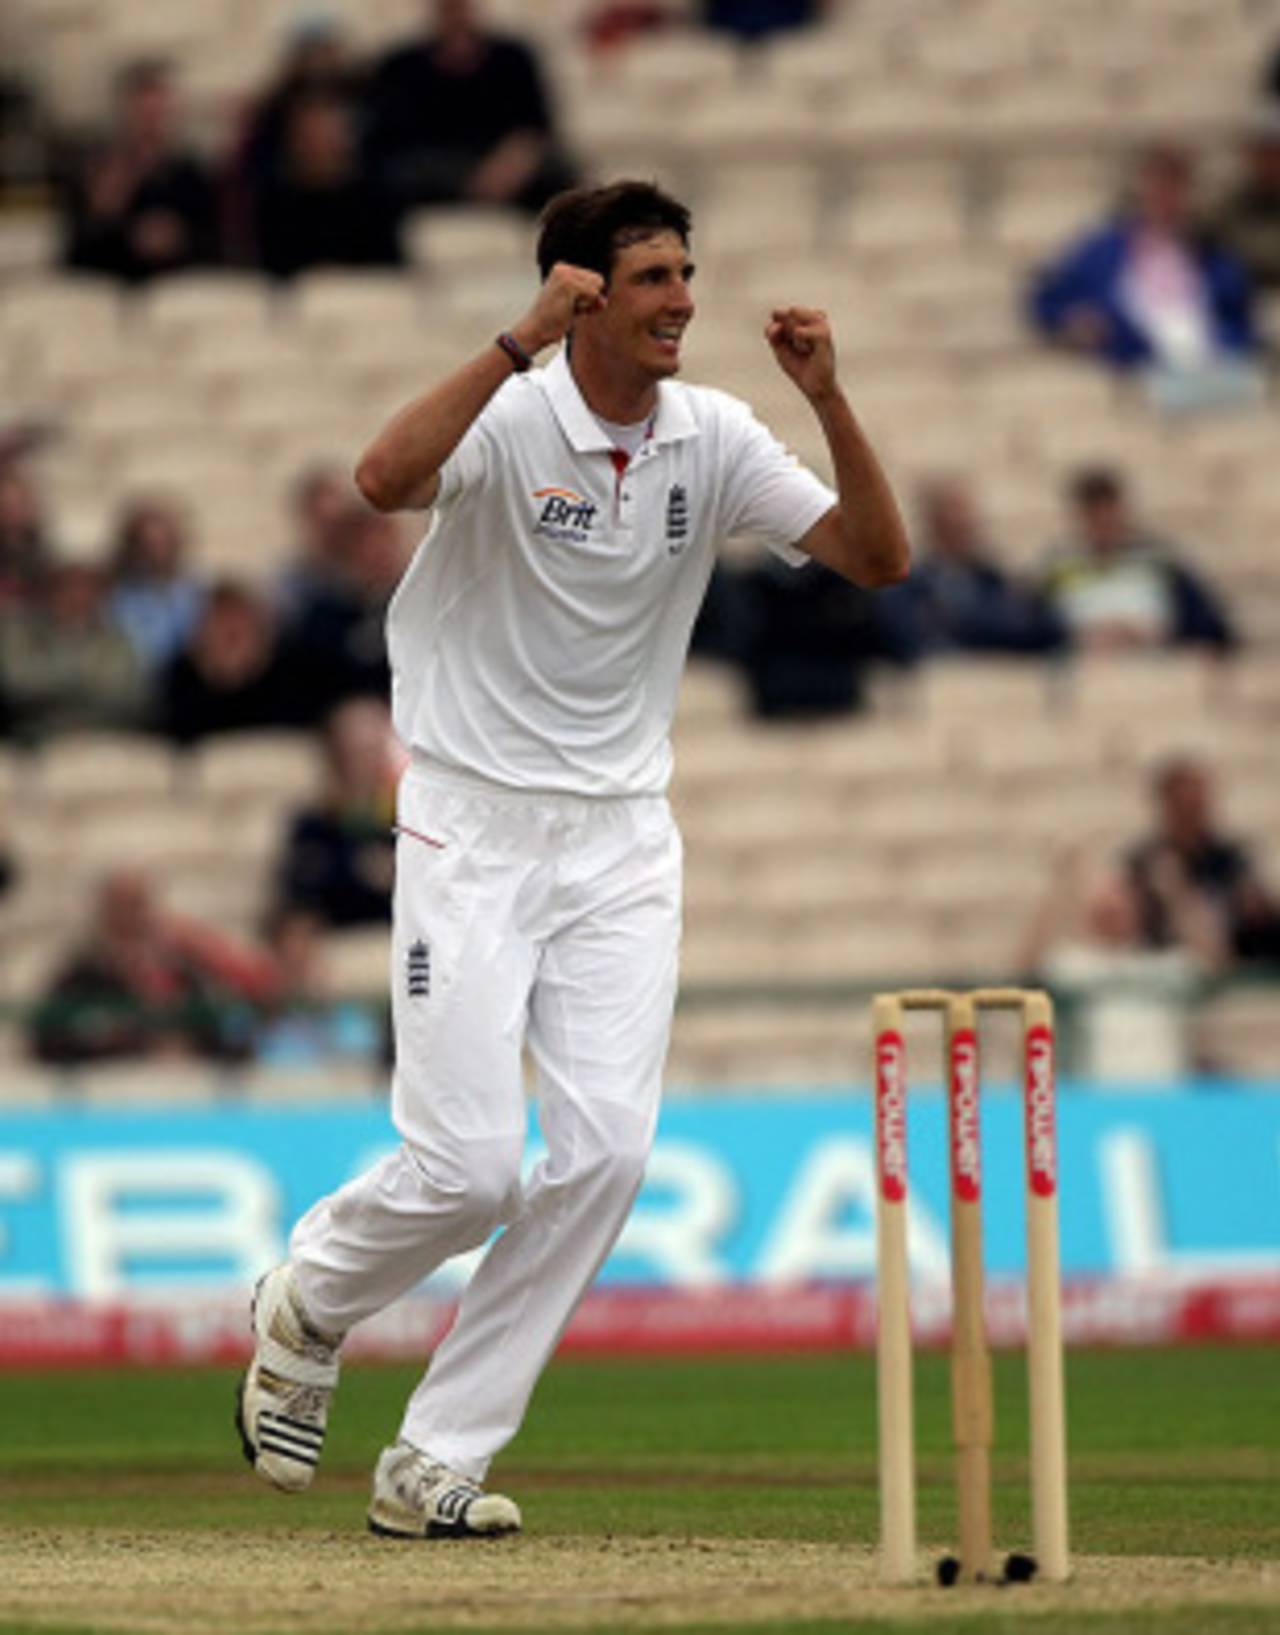 Steven Finn's height and bounce caused problems throughout the series, but he's not the finished product yet&nbsp;&nbsp;&bull;&nbsp;&nbsp;Getty Images